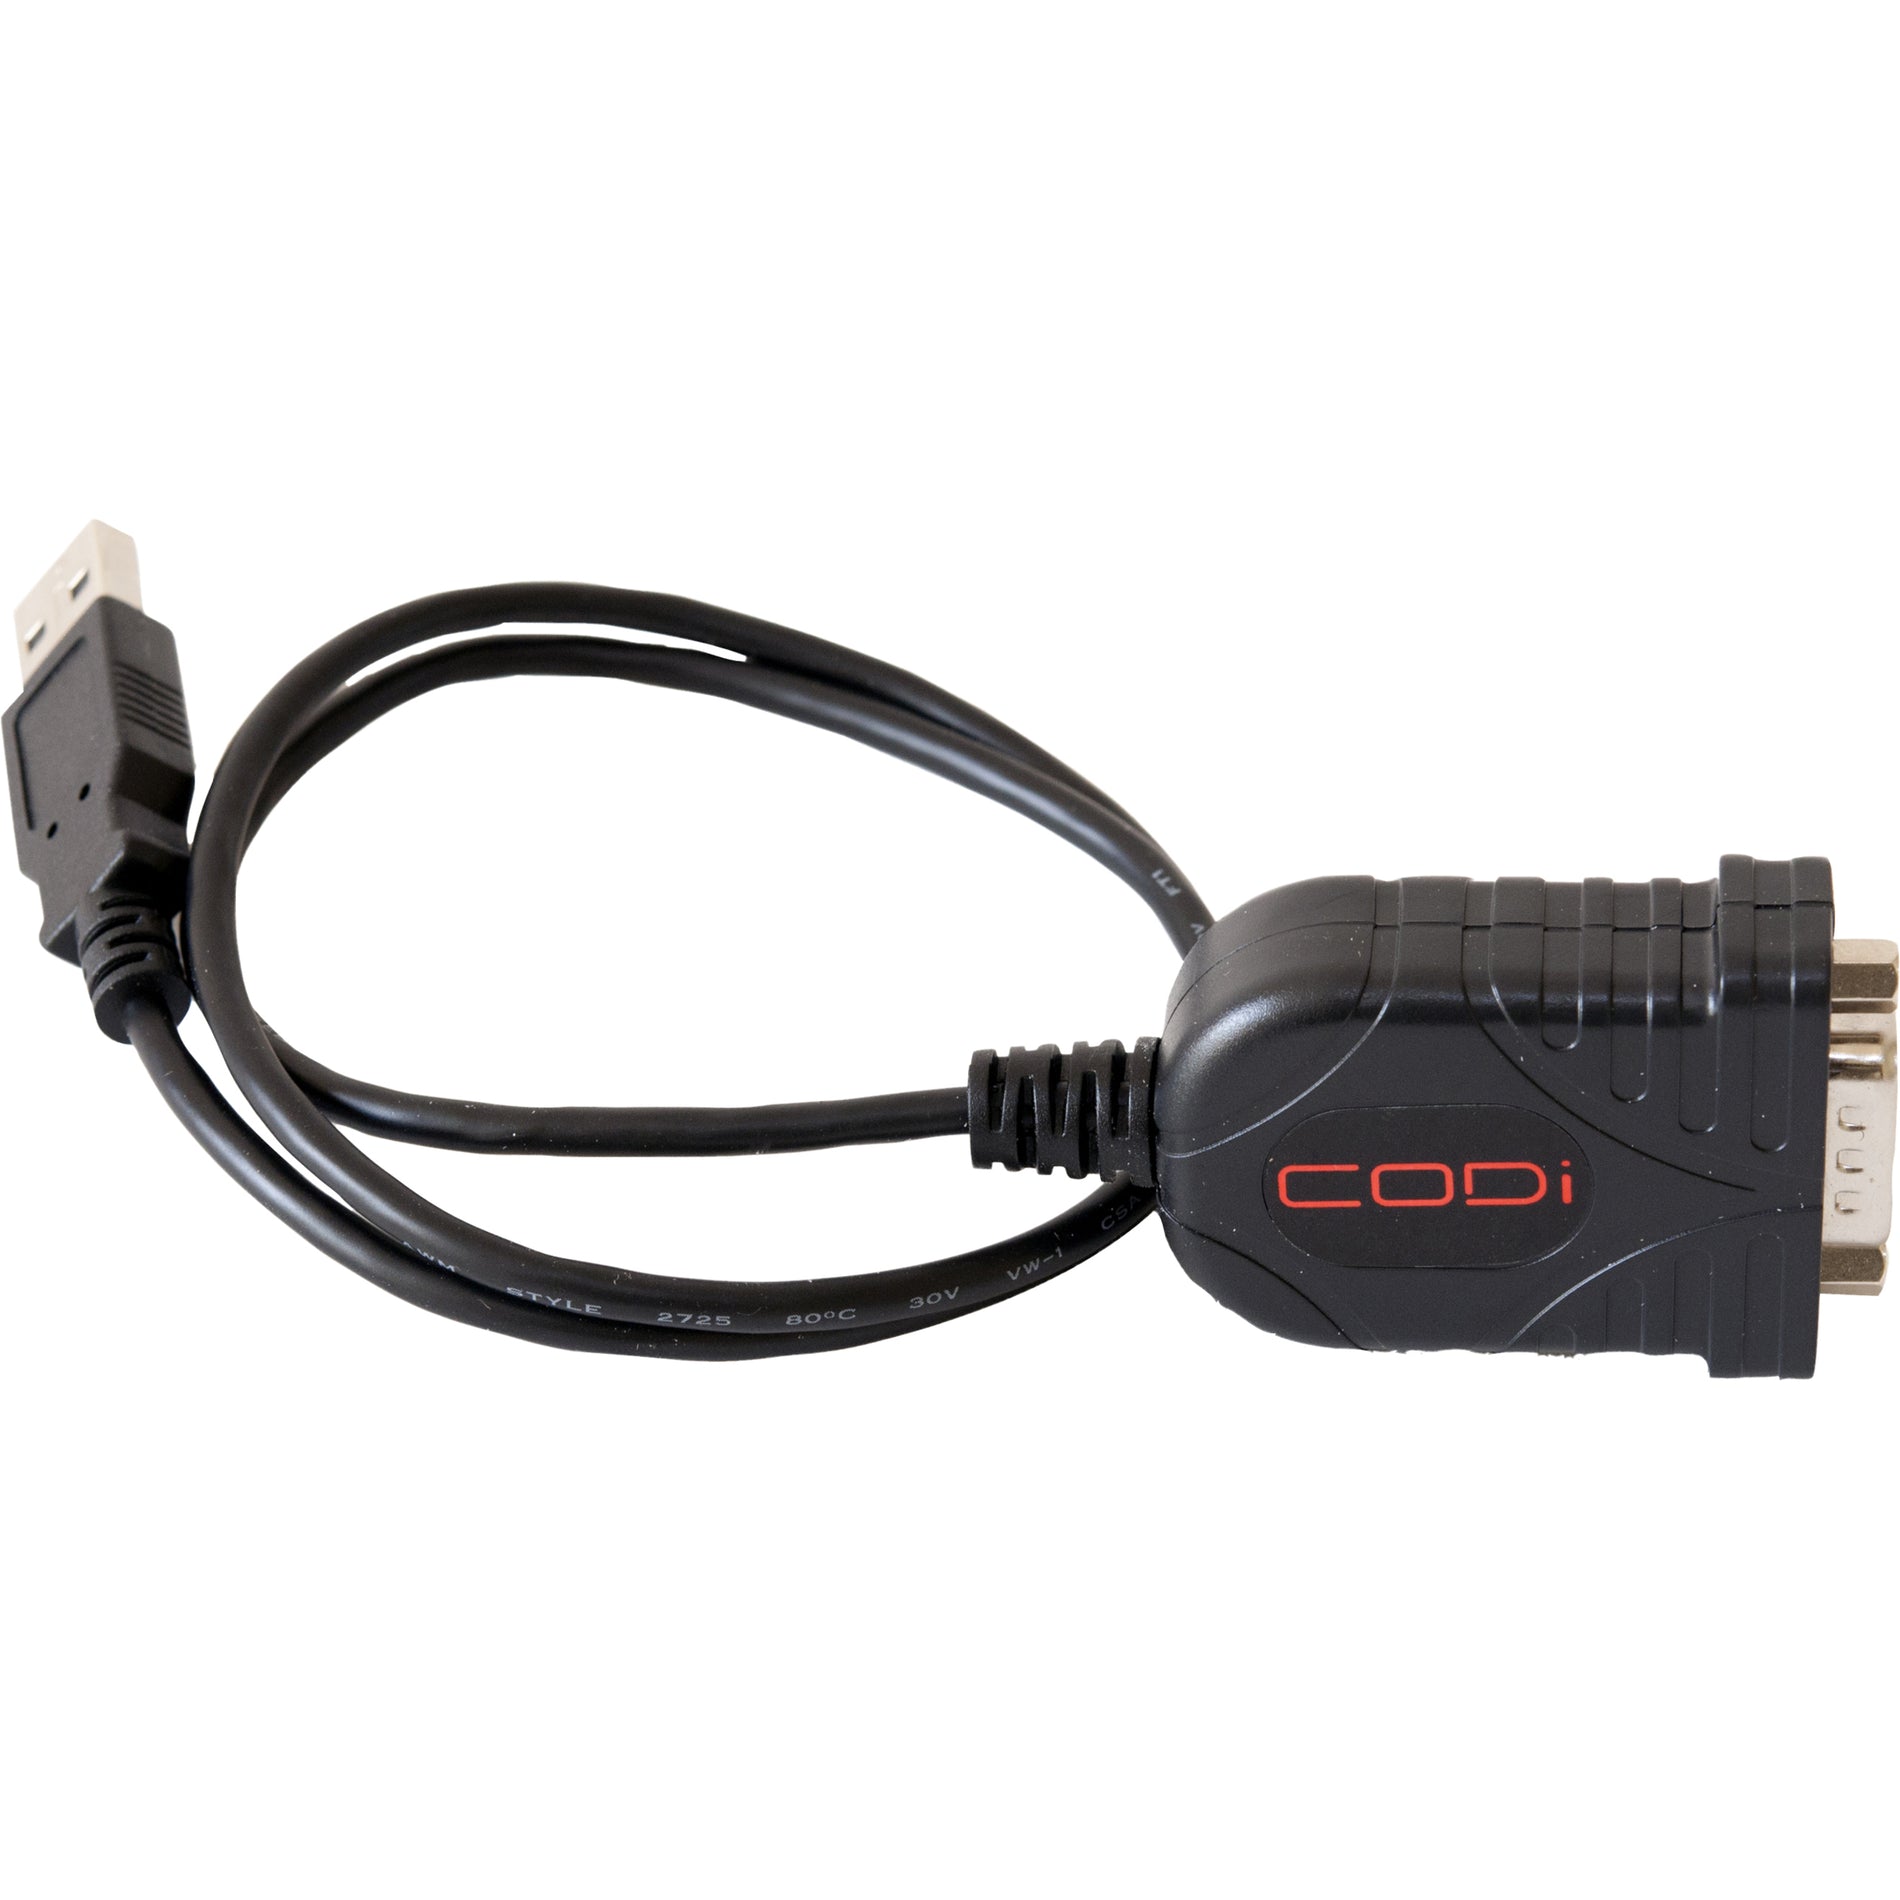 CODi A01026 USB To Serial Adapter Cable, Data Transfer Cable, 1.83 ft, Copper Conductor, Notebook, Handheld Terminal, PDA, Modem, Camera